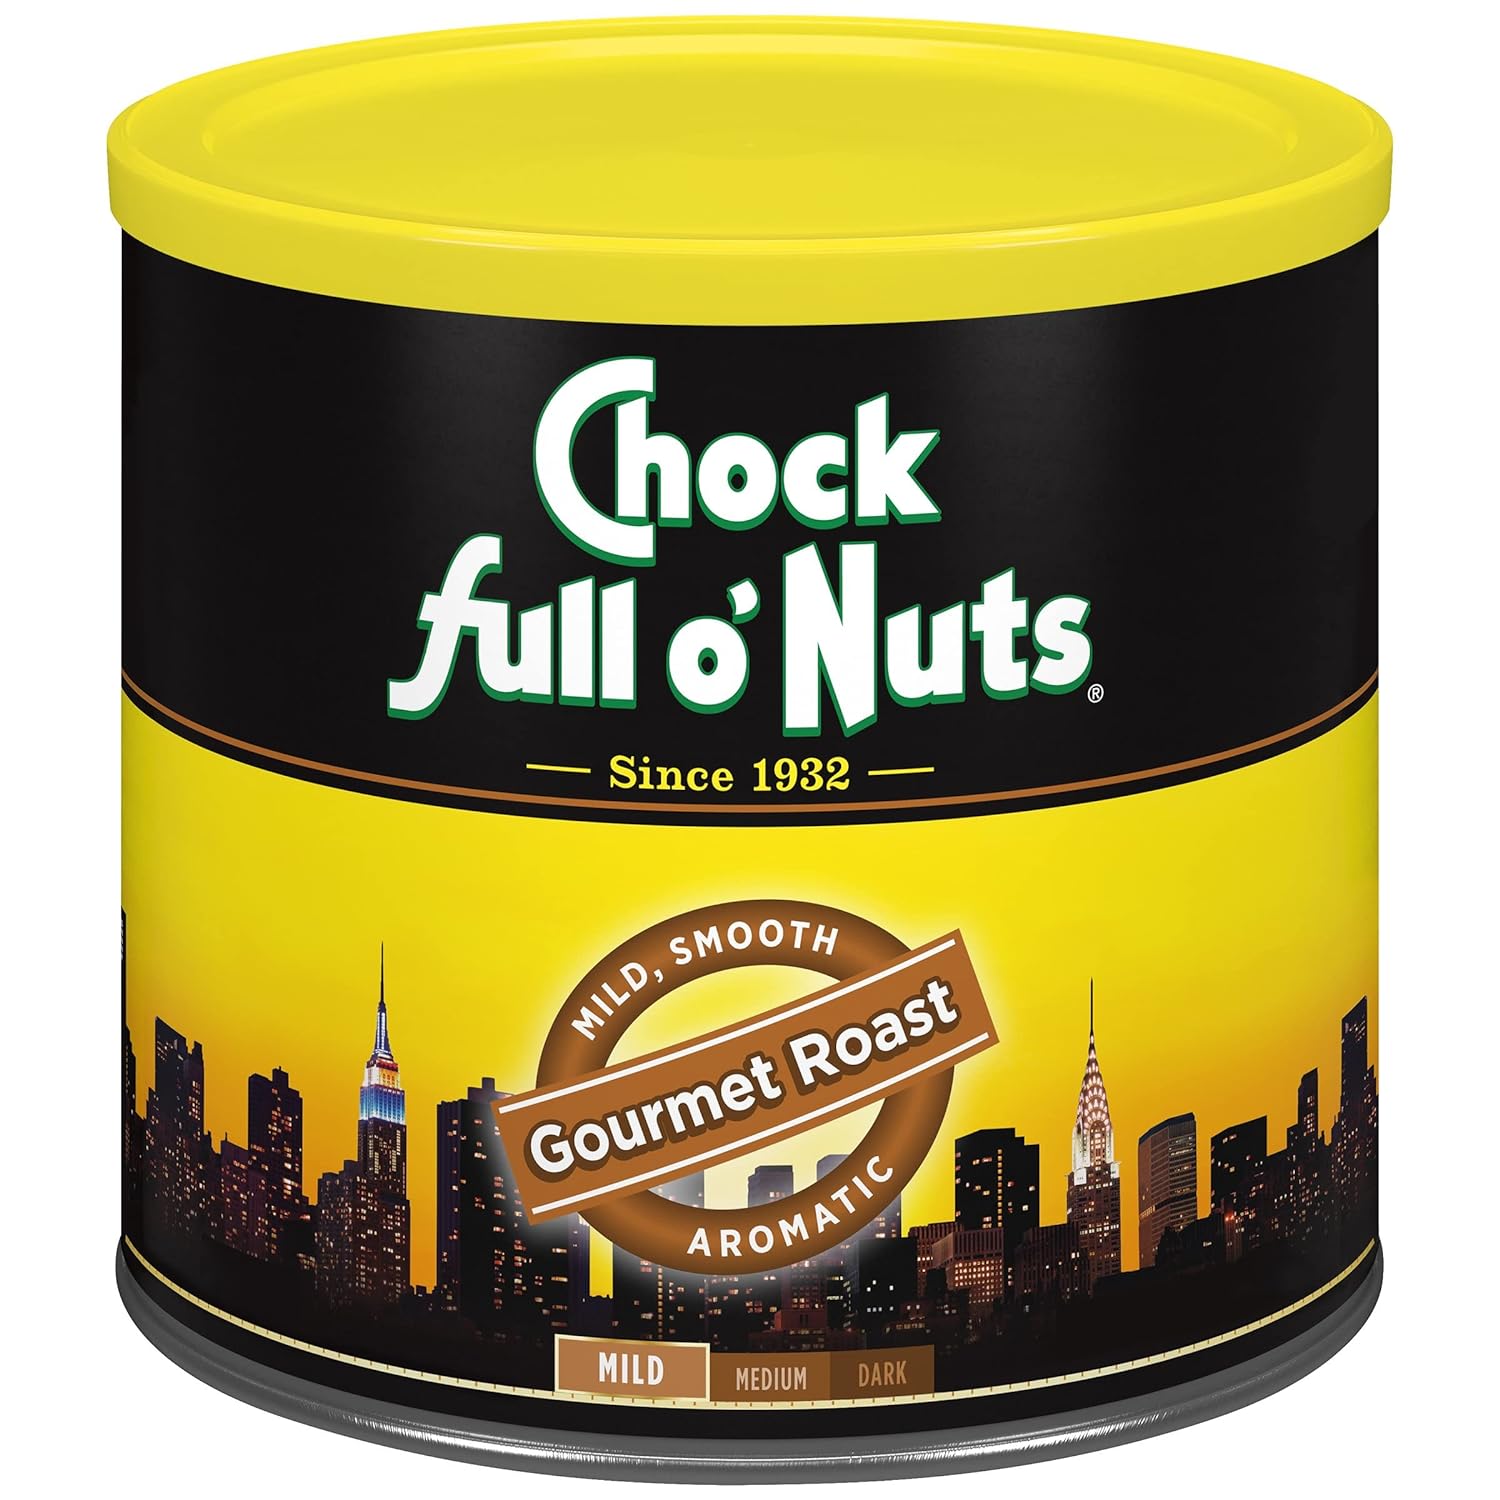 Chock Full o’Nuts Gourmet Roast Ground Coffee, Mild Roast – A Light, Smooth and Aromatic Mild Blend (26 Oz. Can)